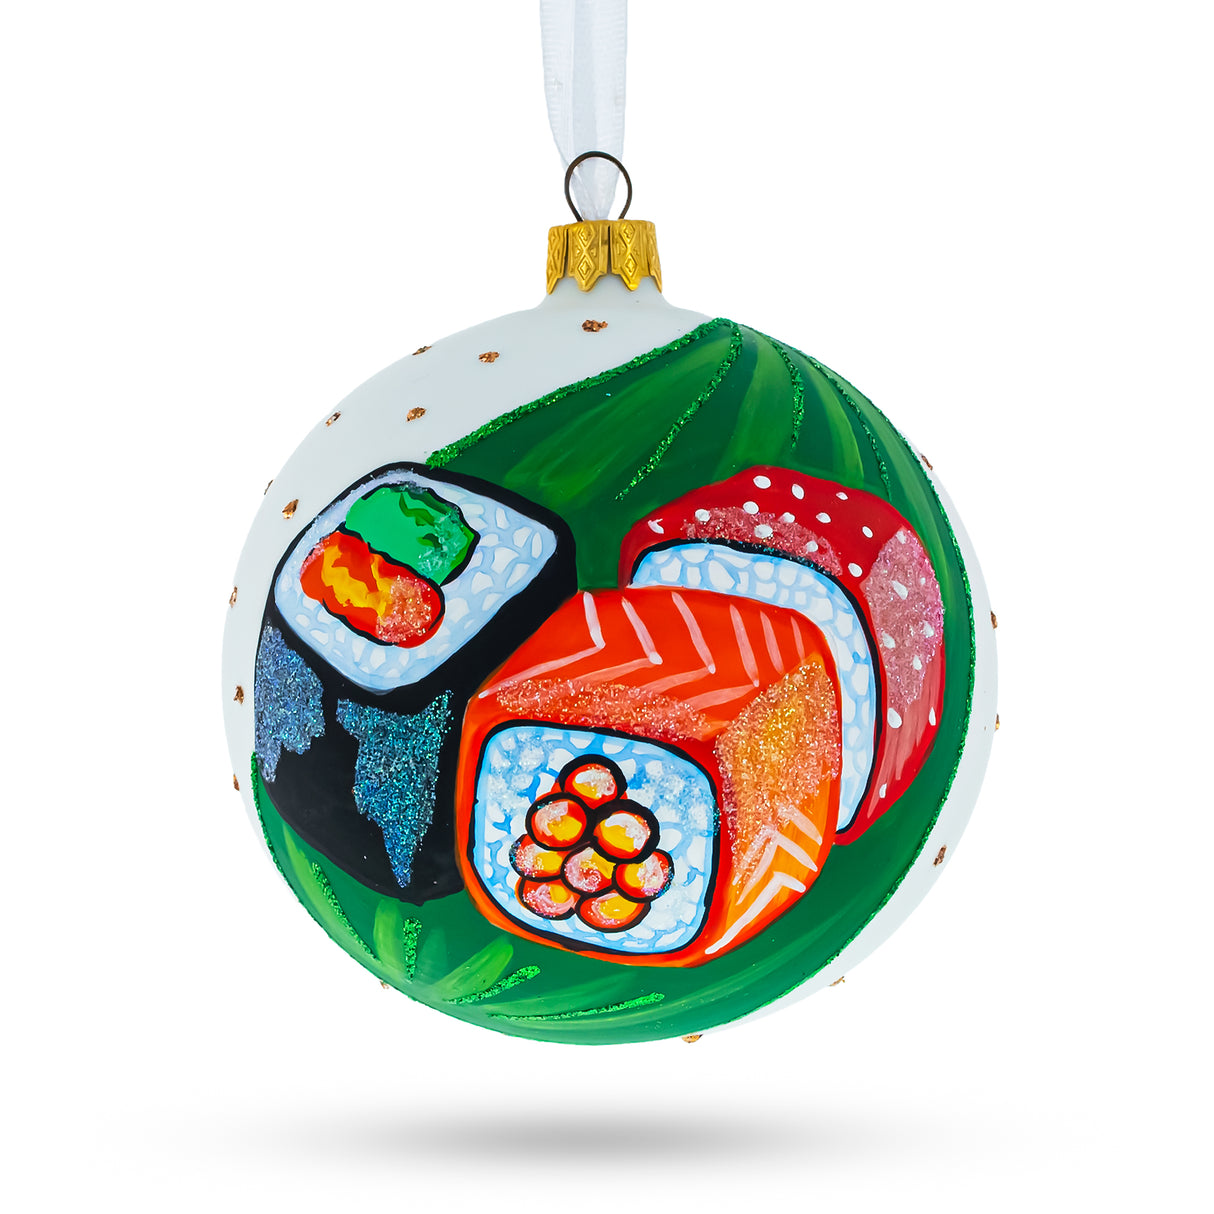 Dedicated Sushi Lover Blown Glass Ball Christmas Ornament 4 Inches in Green color, Round shape